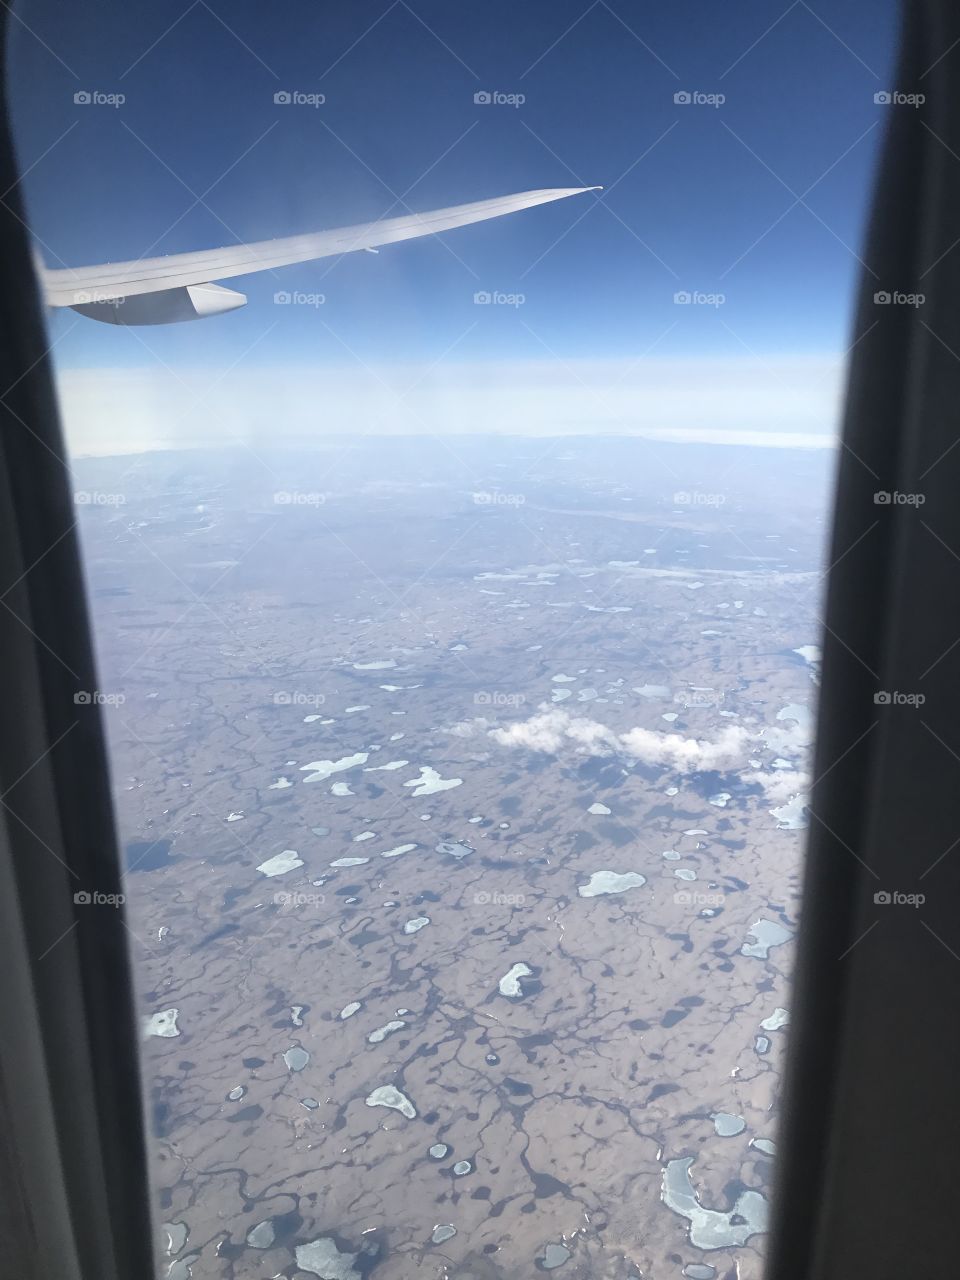 When you look out your air plane window...